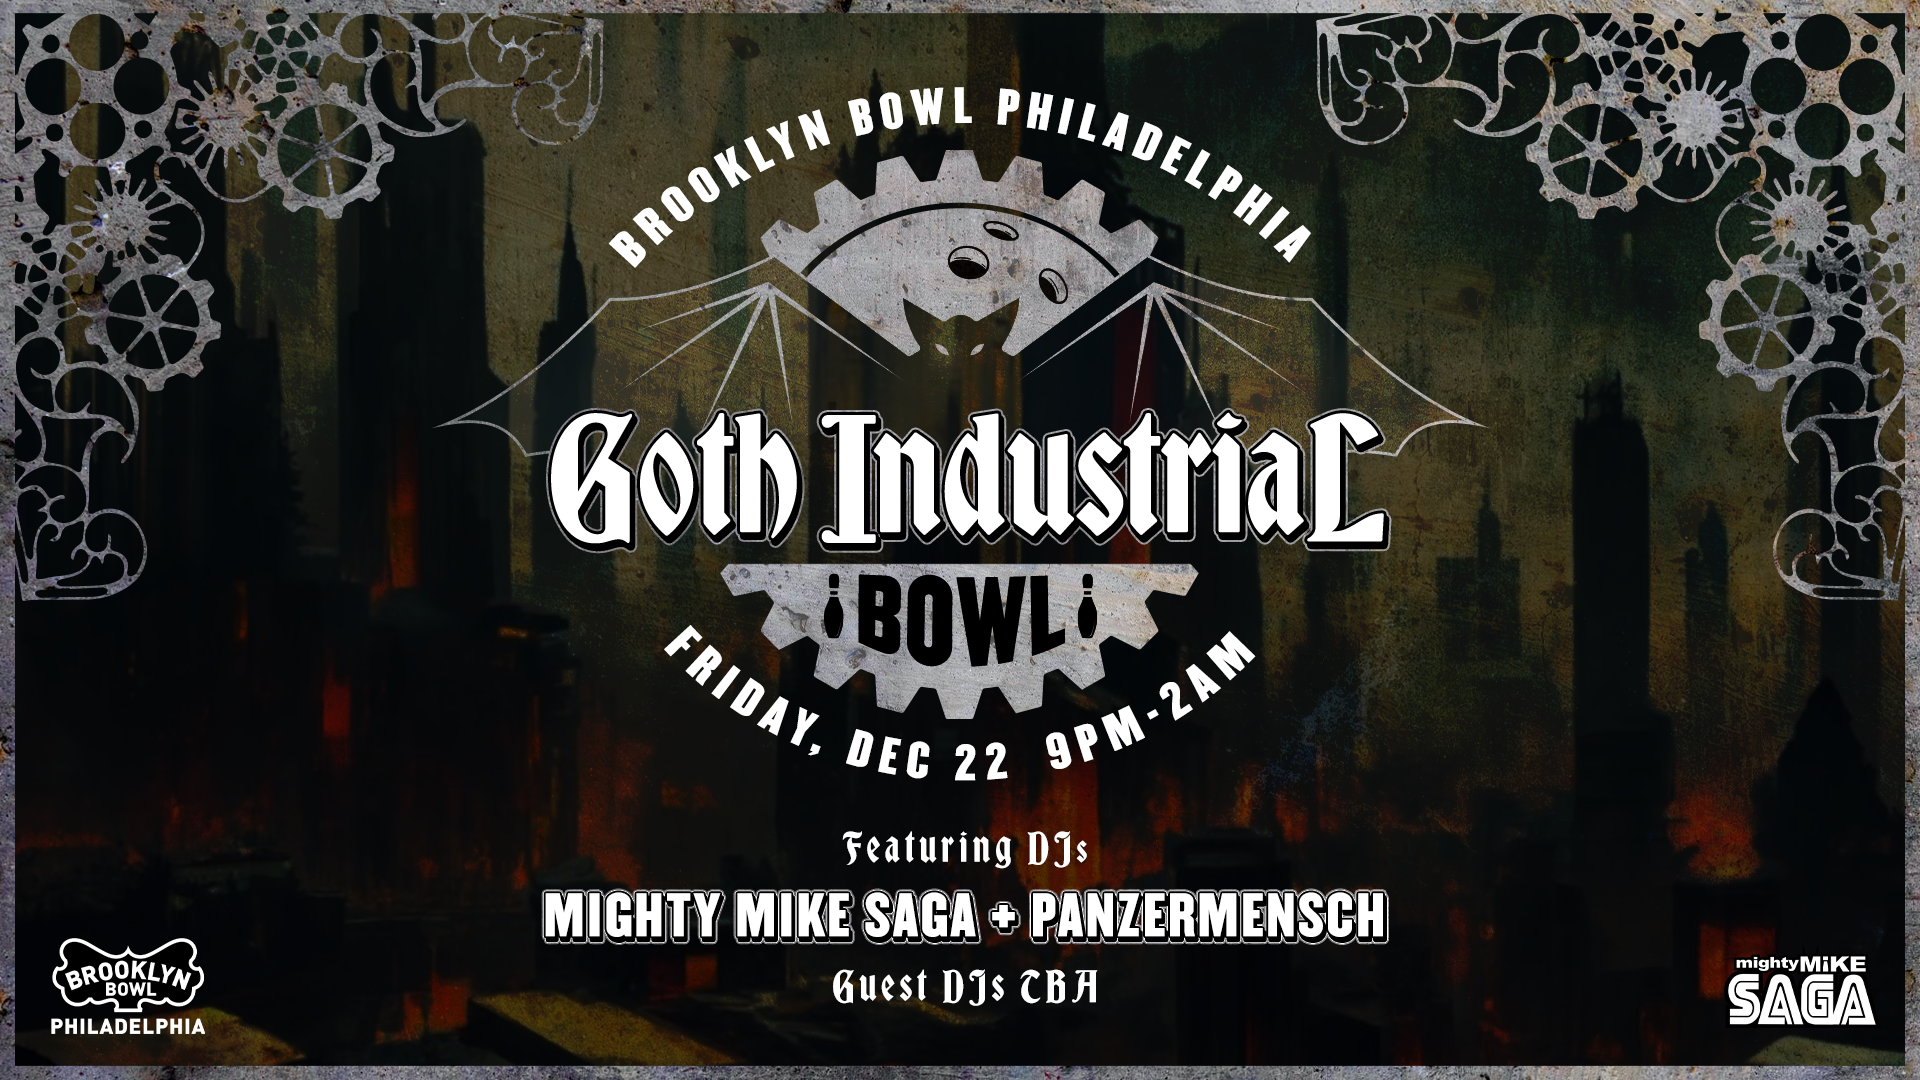 More Info for Goth Industrial Bowl Ft. Mighty Mike Saga & Panzermensch